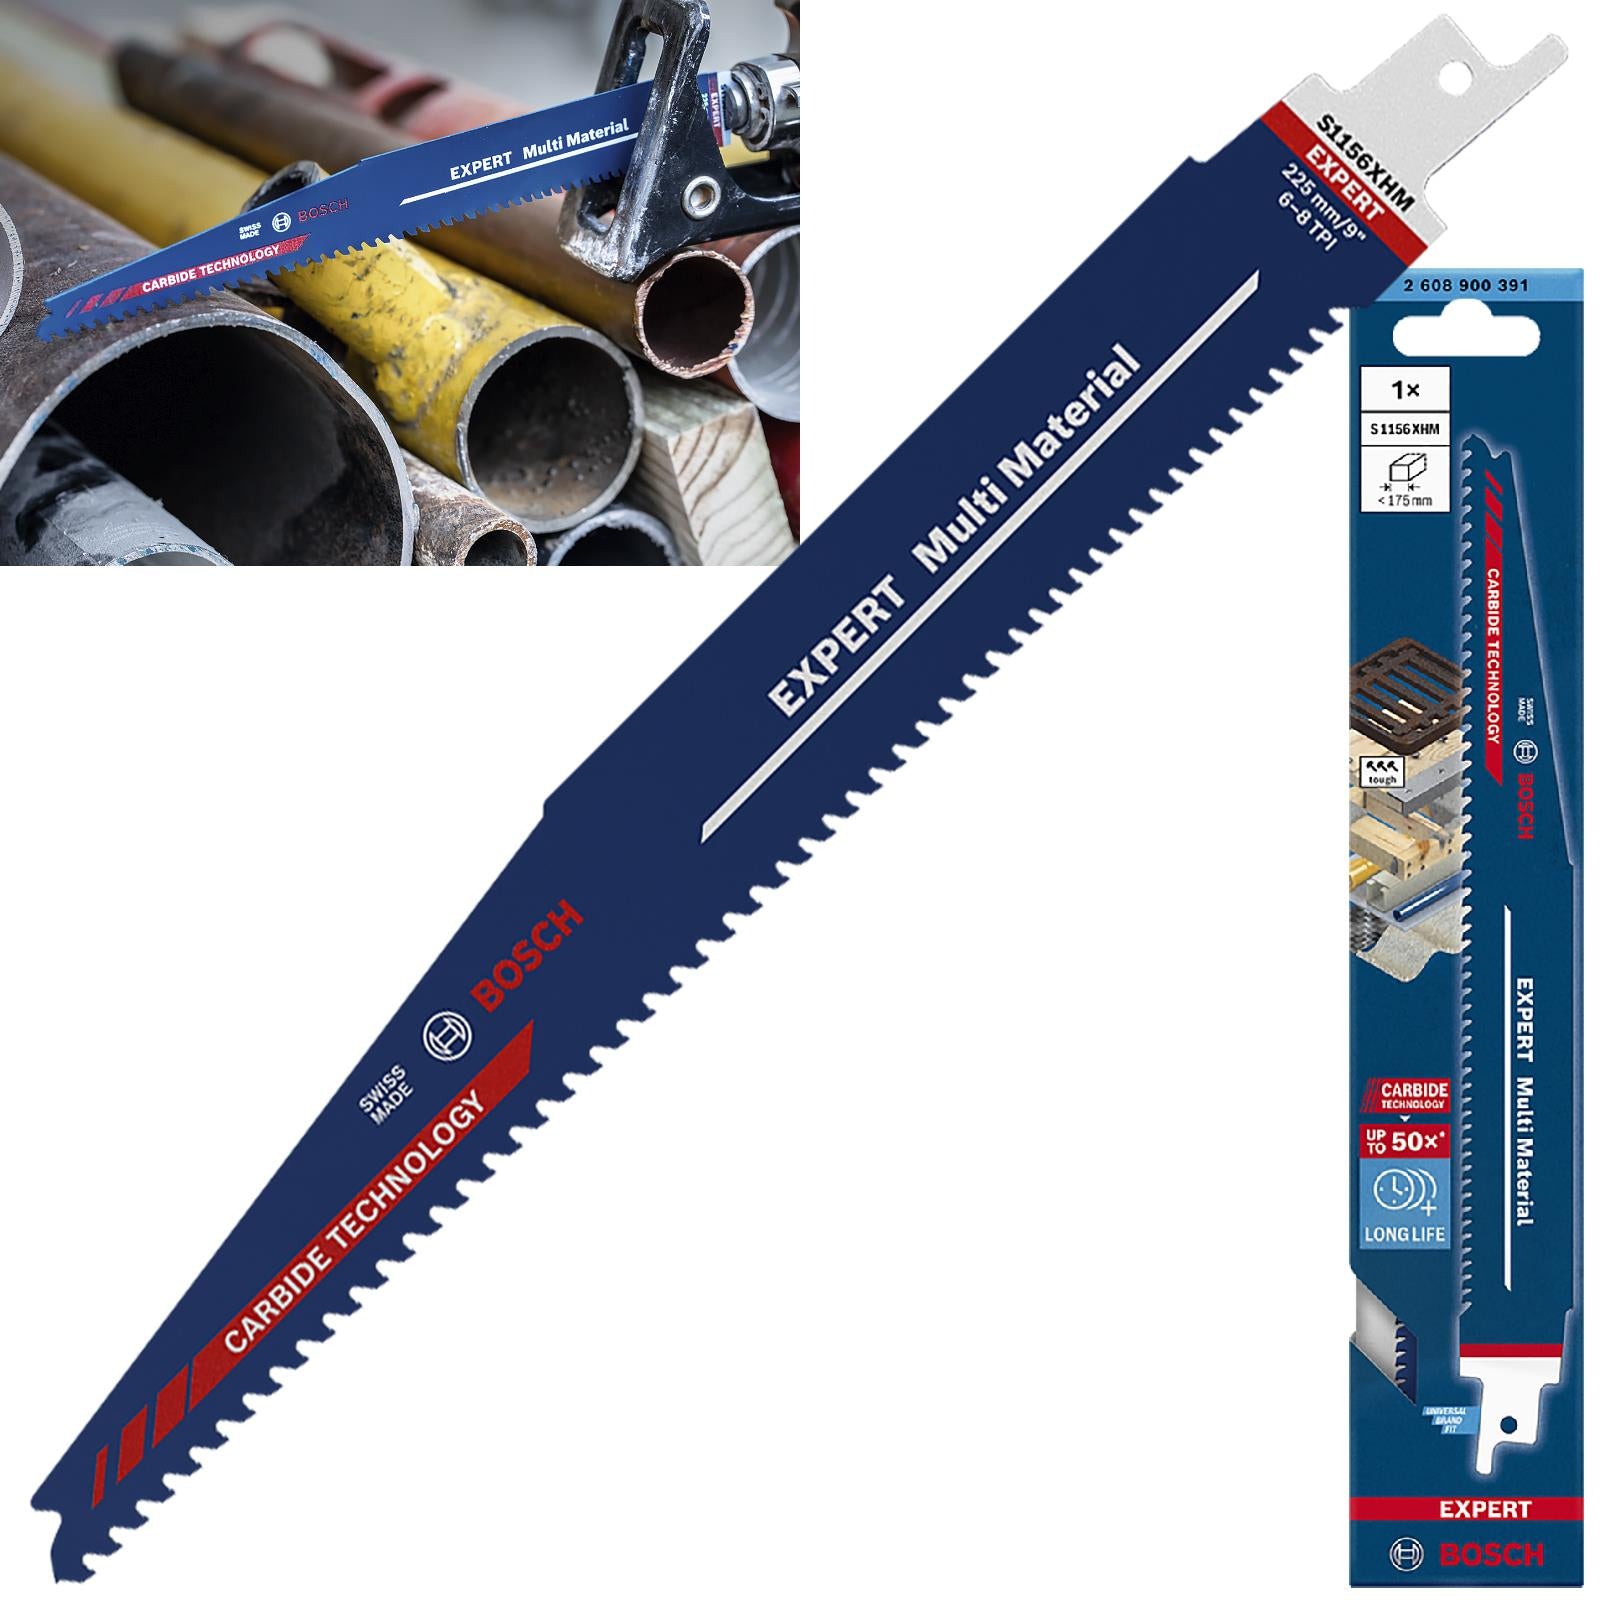 Bosch EXPERT Reciprocating Saw Blade Multi Material 225mm 9" S1156XHM 1 Pack